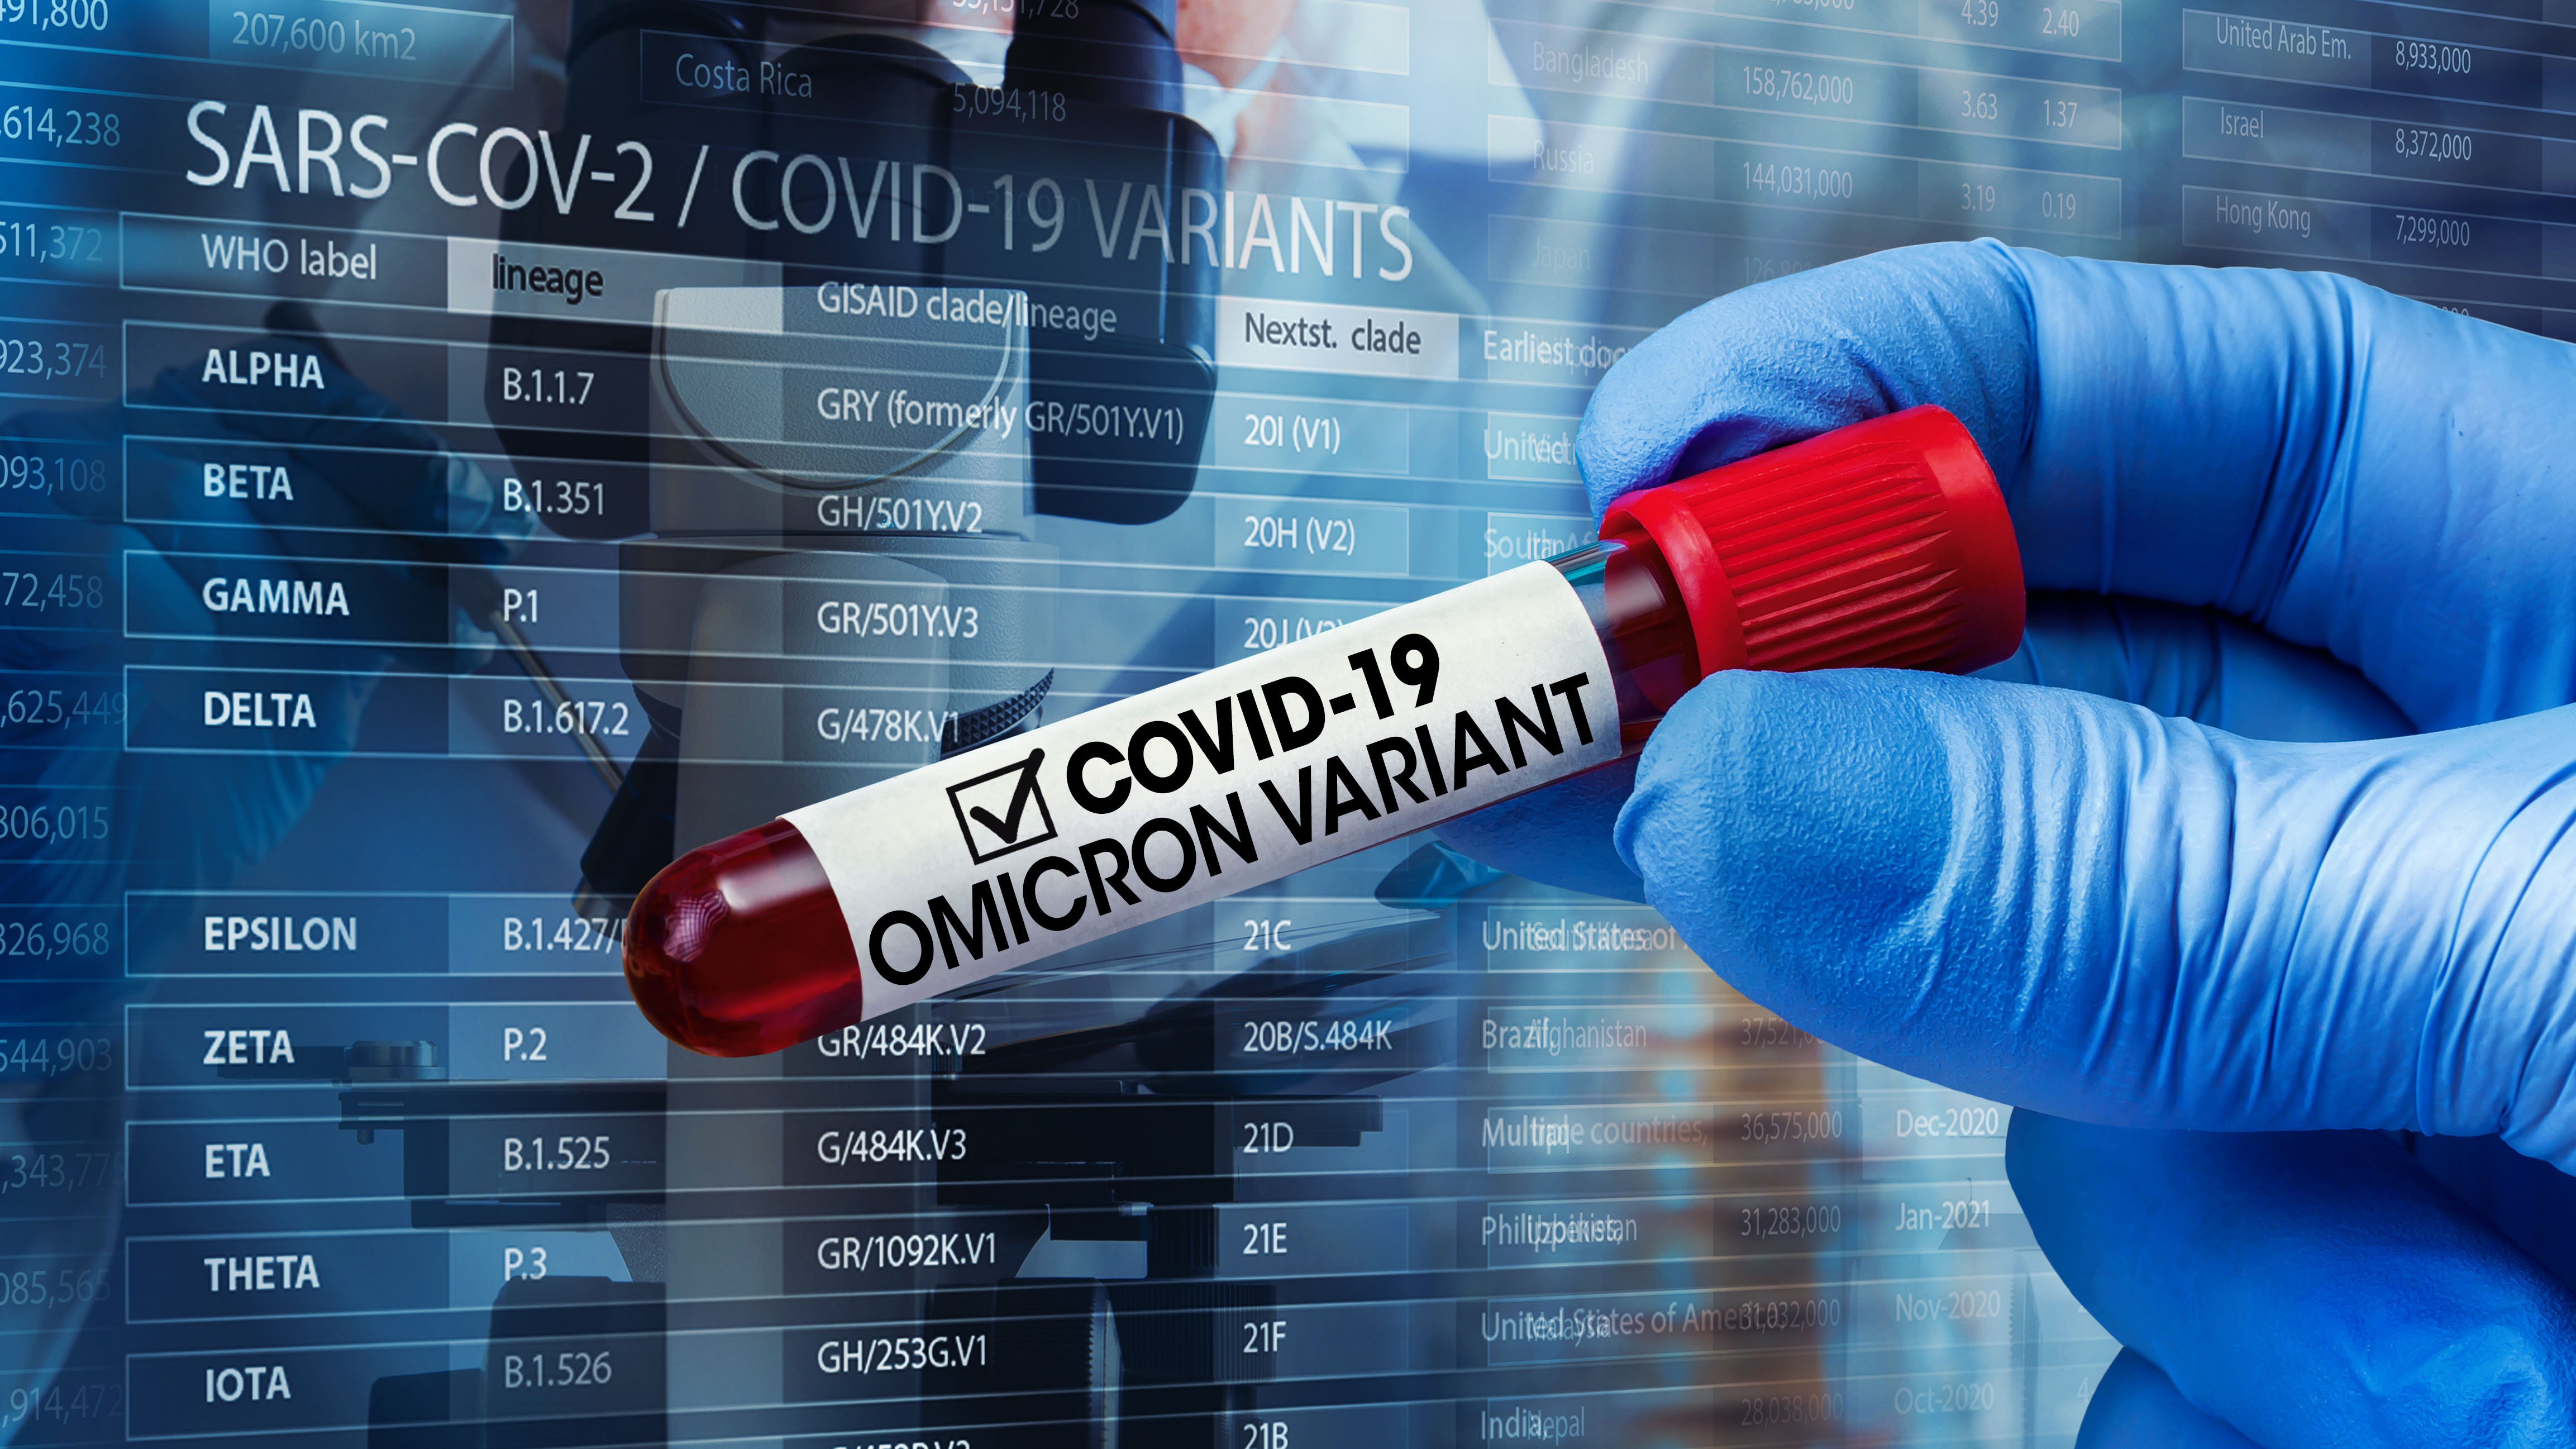 Omicron symptoms might differ from those other COVID-19 variants